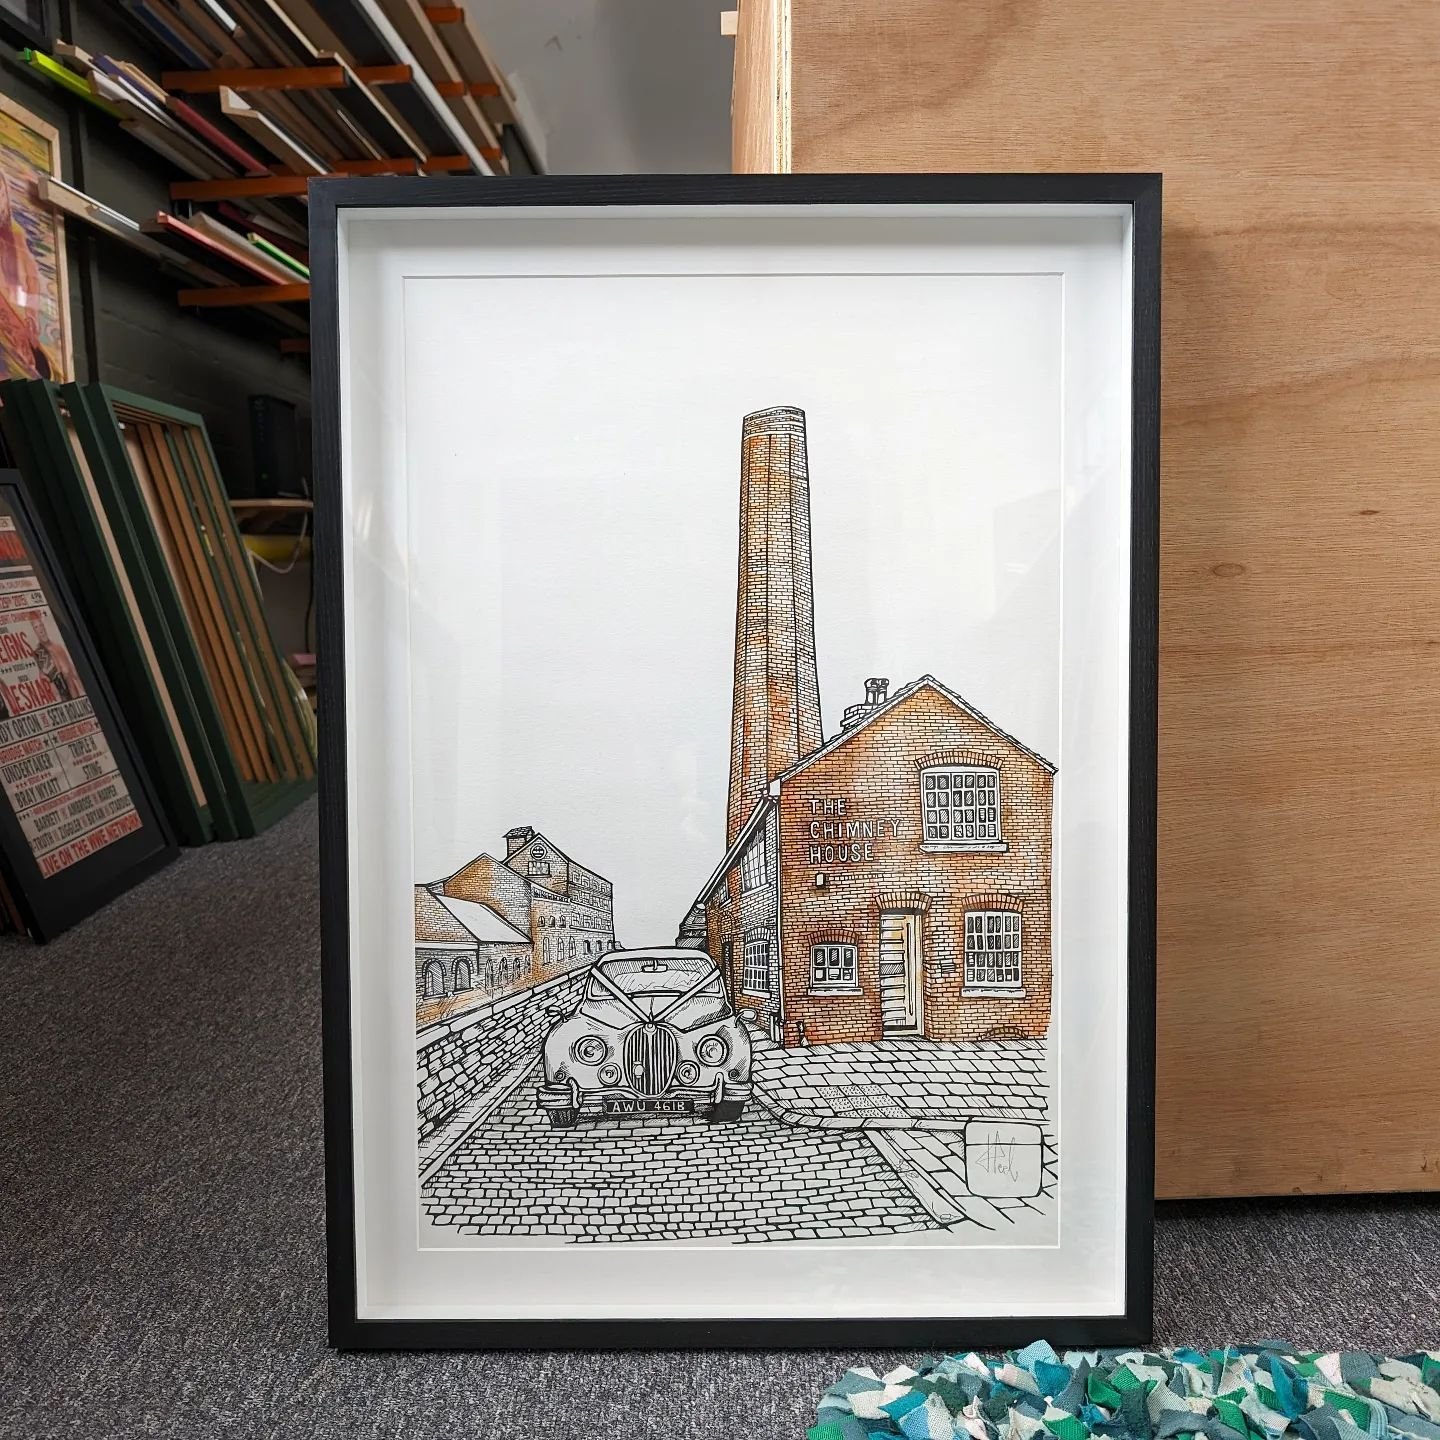 JO PEEL //
Painter, print maker, animator and film maker. You're never too far away from Jo's artwork in Sheffield, best known for her distinctive line drawings documenting ever changing city landscapes.
.
This piece is a private commission of Chimne